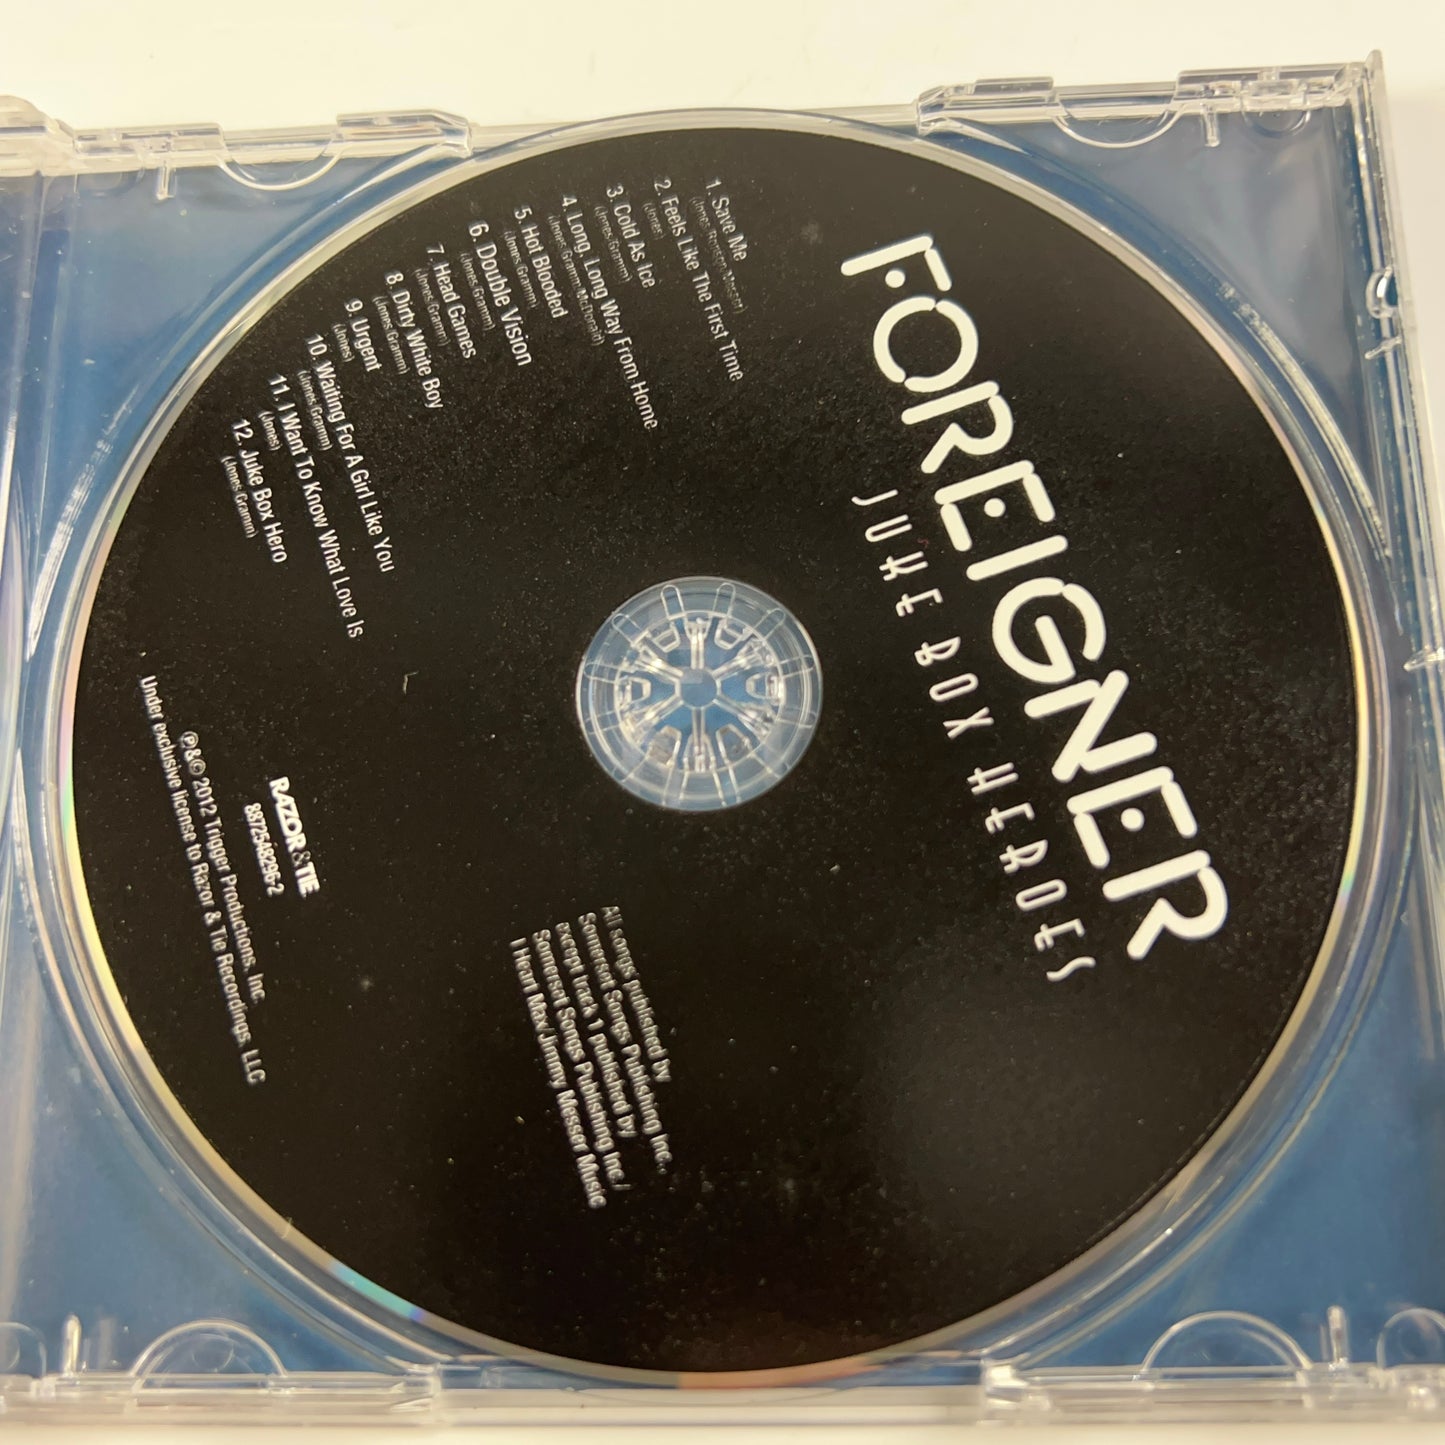 Jukebox Heroes by Foreigner (CD, Oct-2012, BMG)